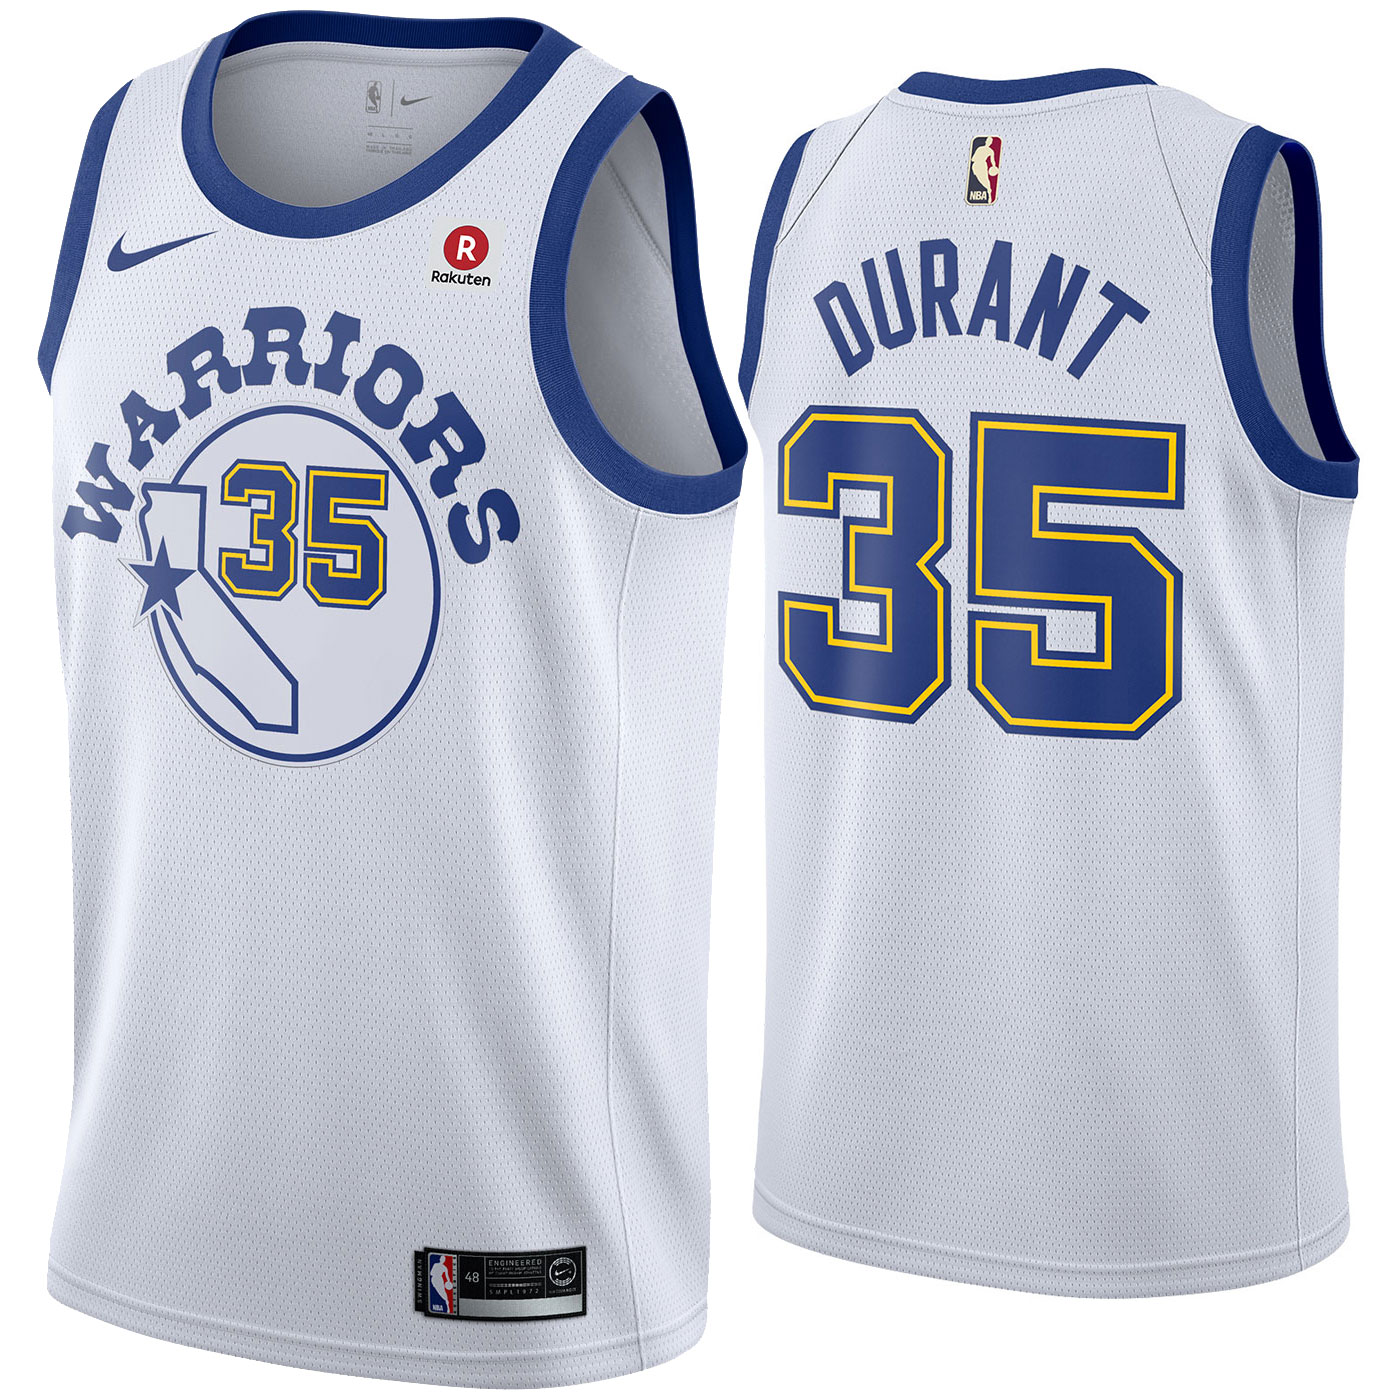 Warriors to Debut Classic Edition Uniforms Tonight, Swingman Jerseys Available to ...